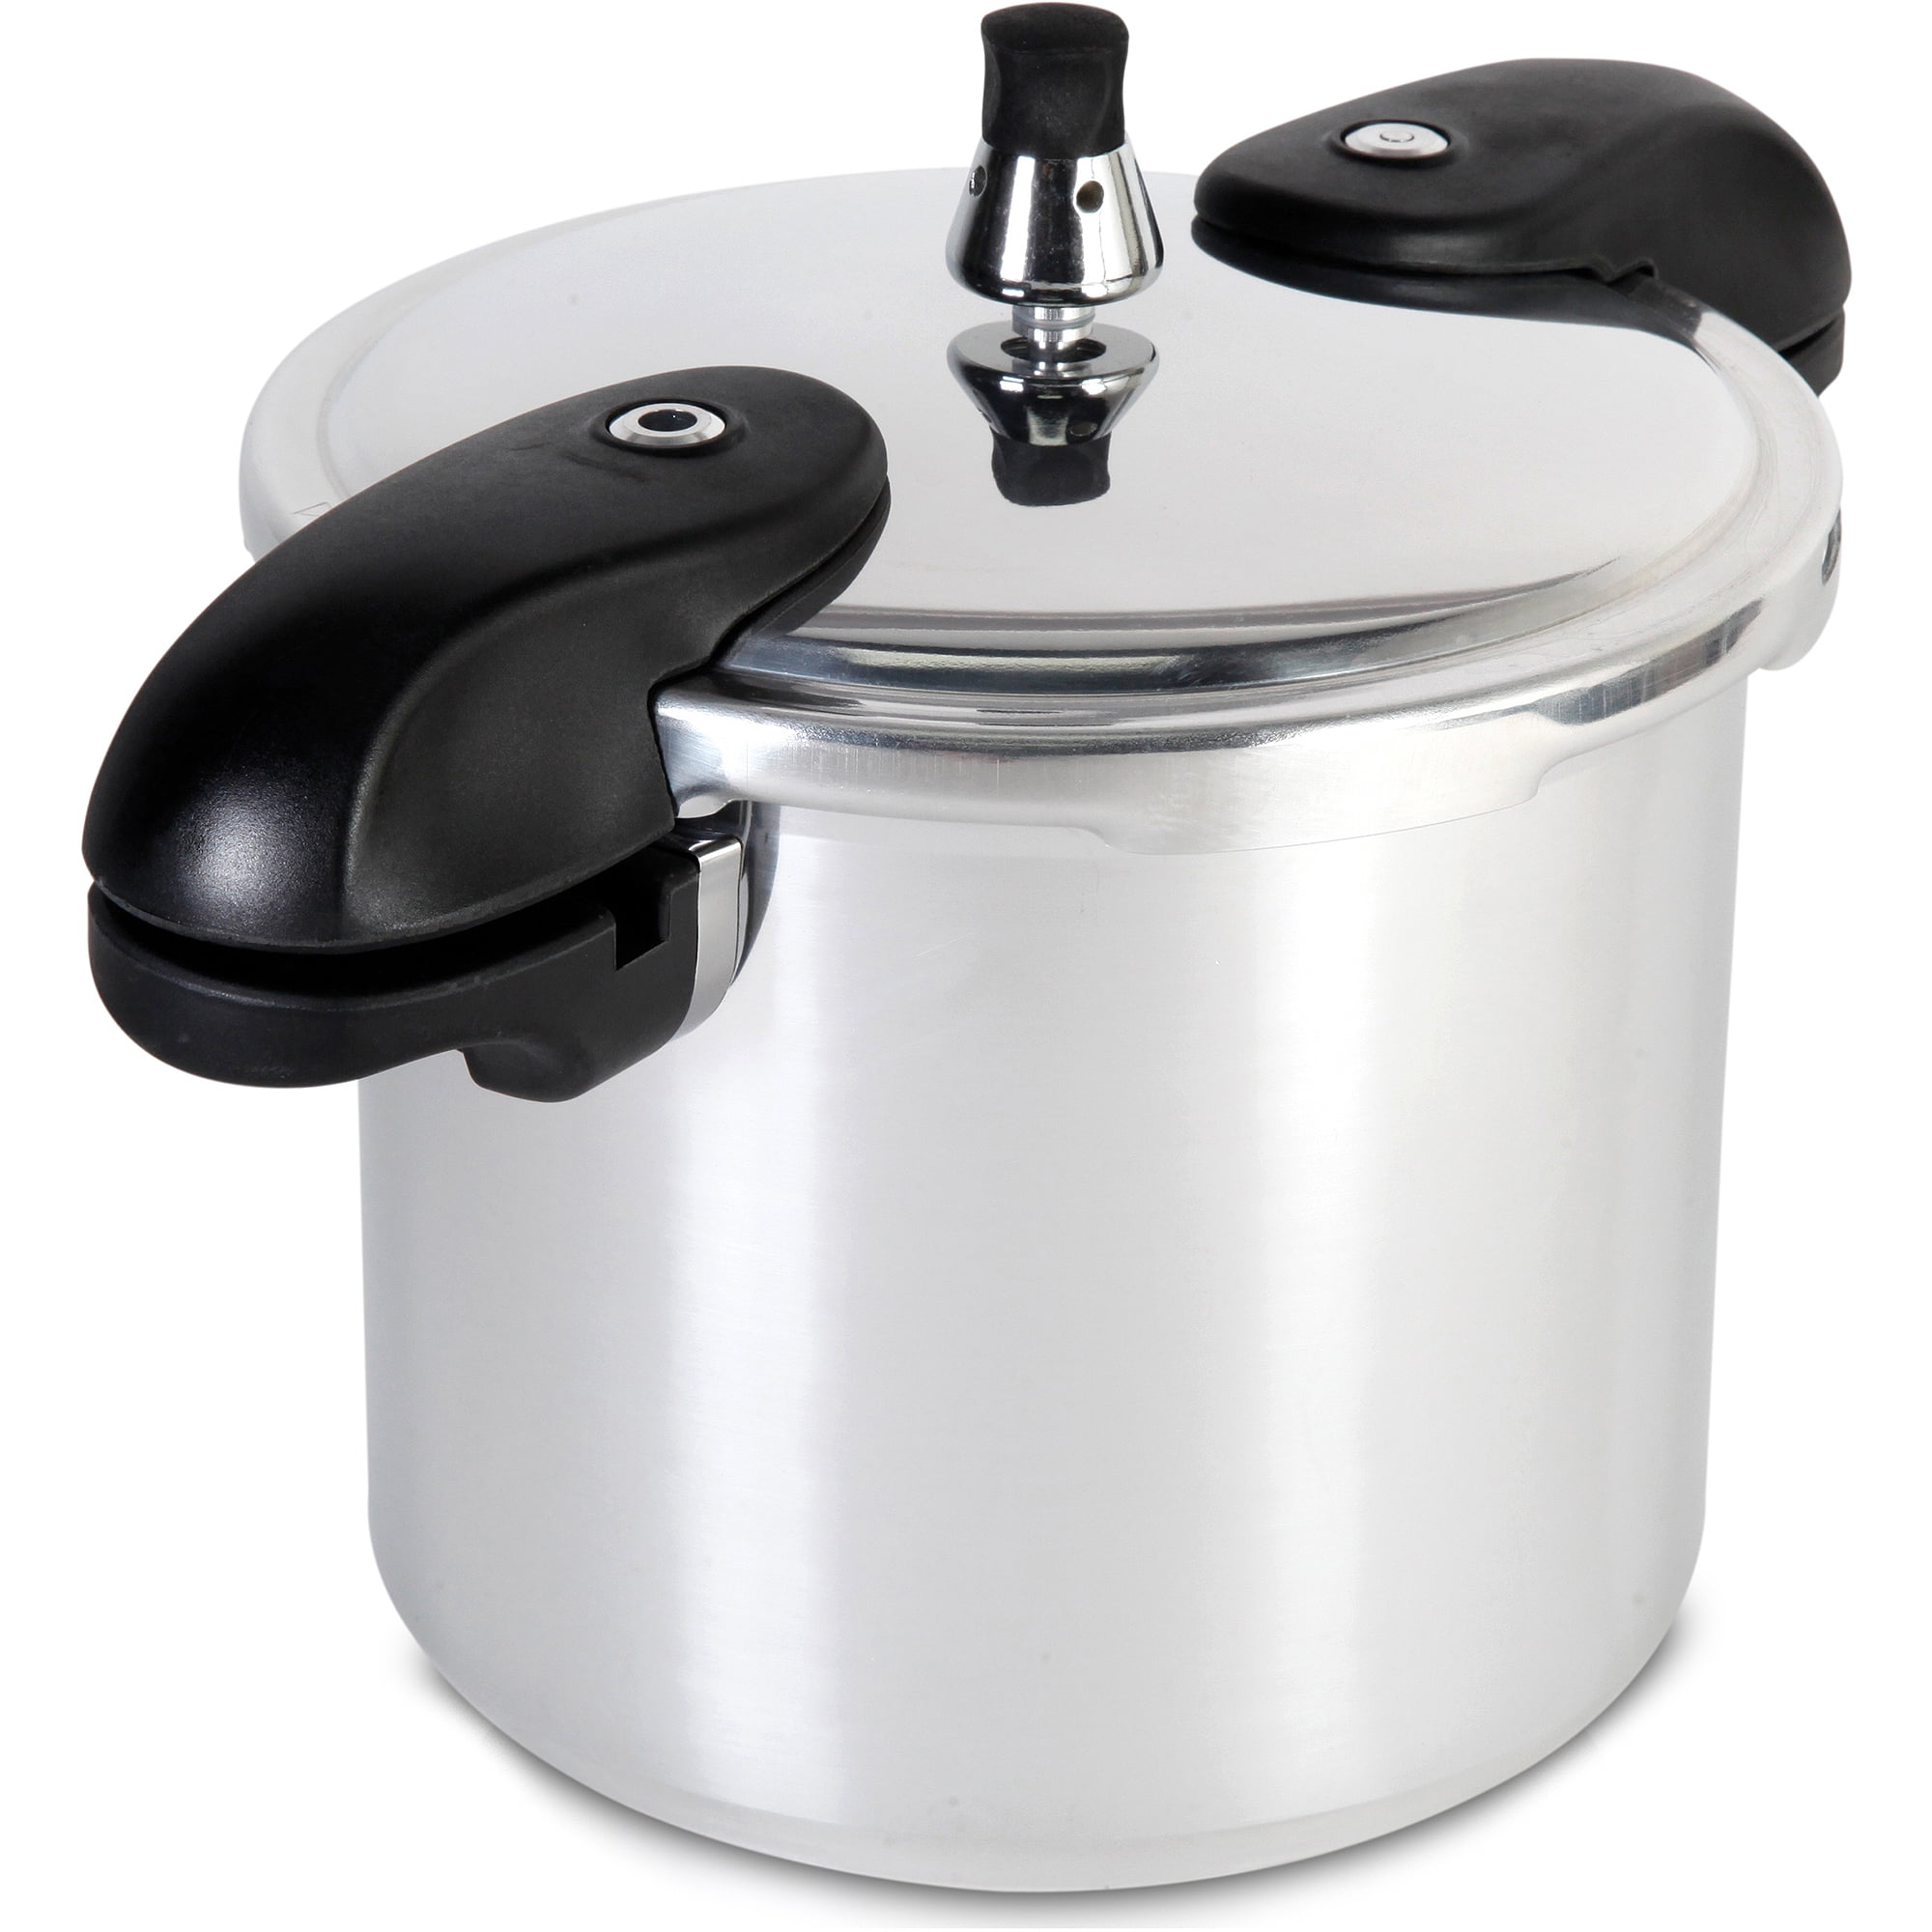 Oster pressure cooker parts,China price supplier - 21food